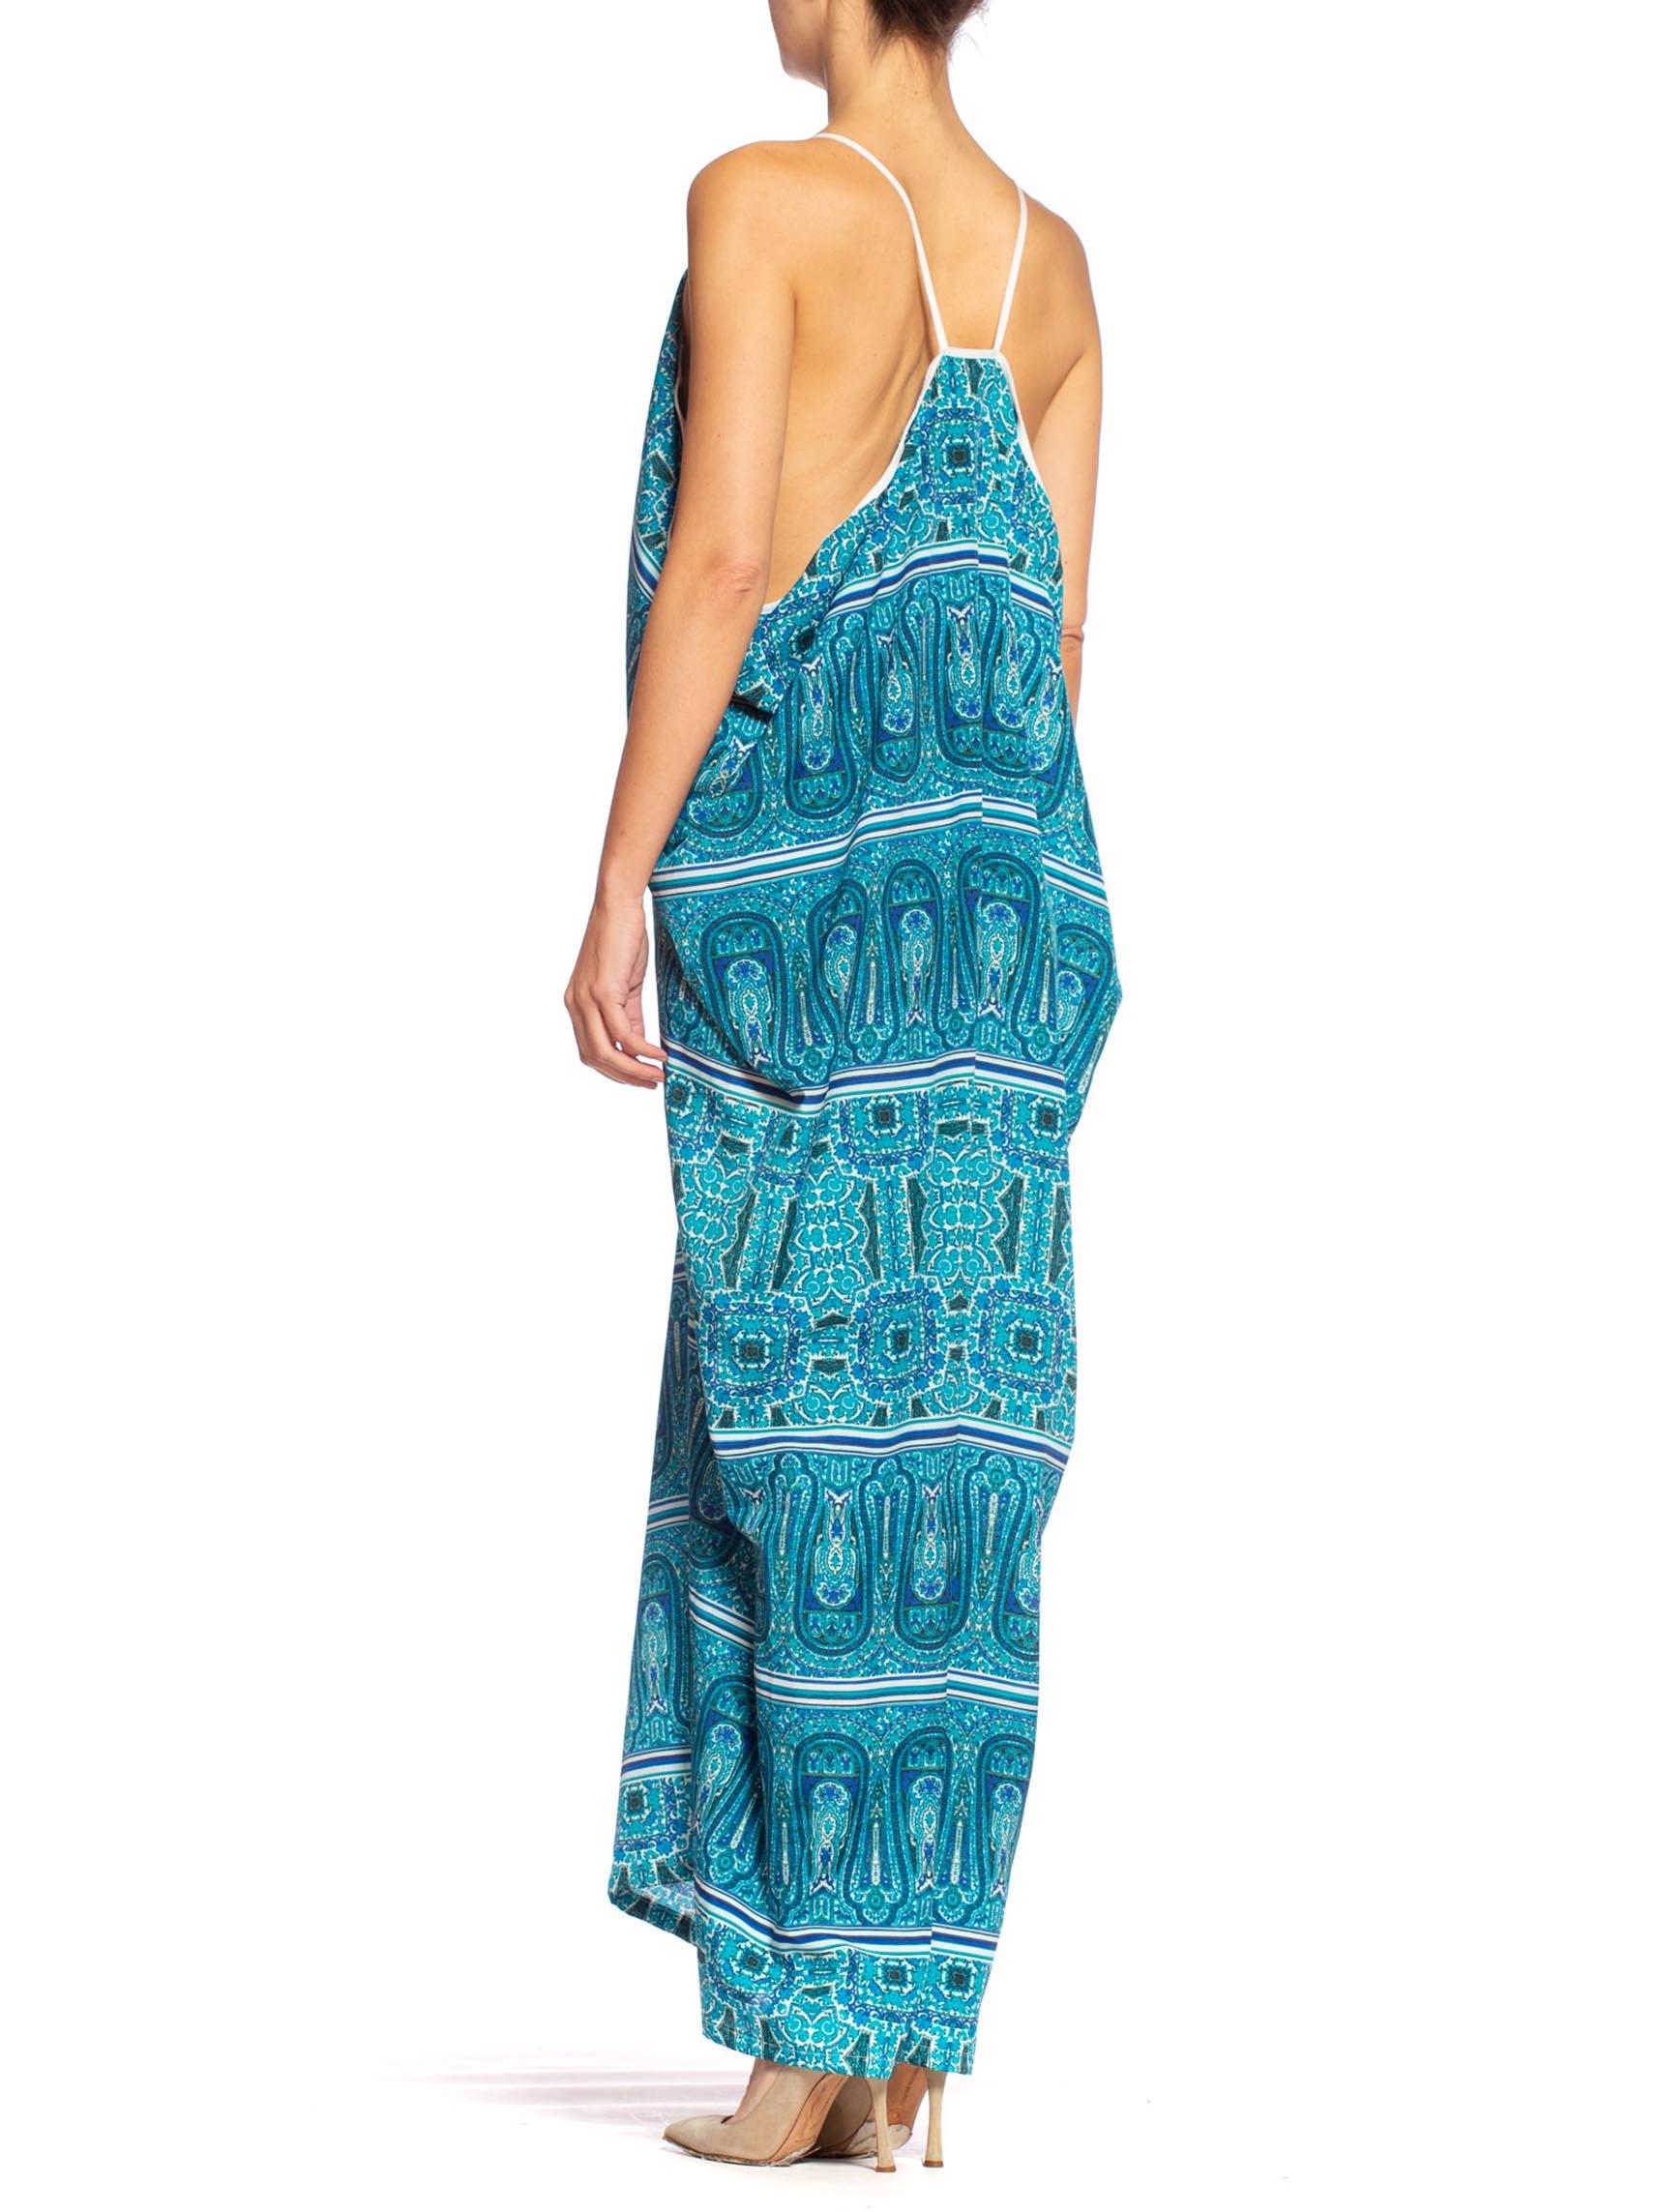 MORPHEW COLLECTION Teal Paisley Poly Blend Easy Breezy Everbody Maxi Dress Made 3